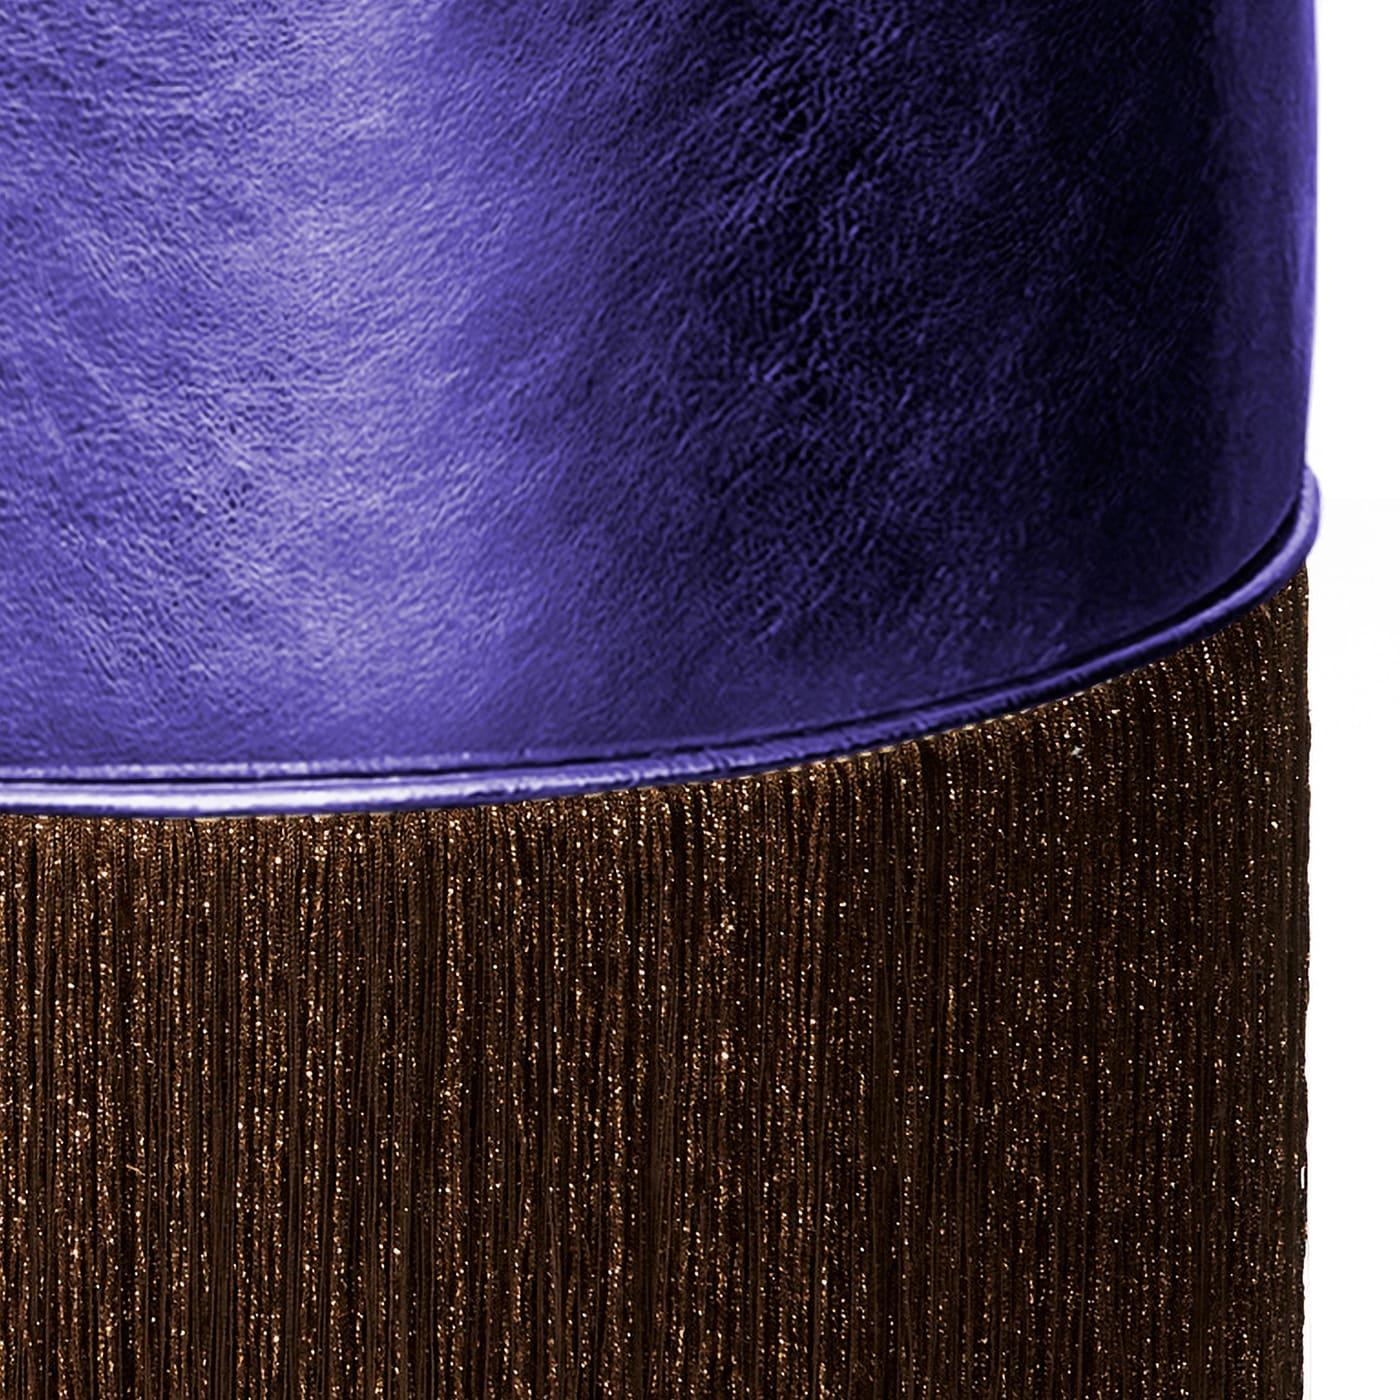 The Gleaming collection by Lorenza Bozzoli Couture shines in its own light and captures attention with its lustrous allure. The seatings of the signature fringed poufs have been enveloped into foil-finished leather glossy and radiant, carefully